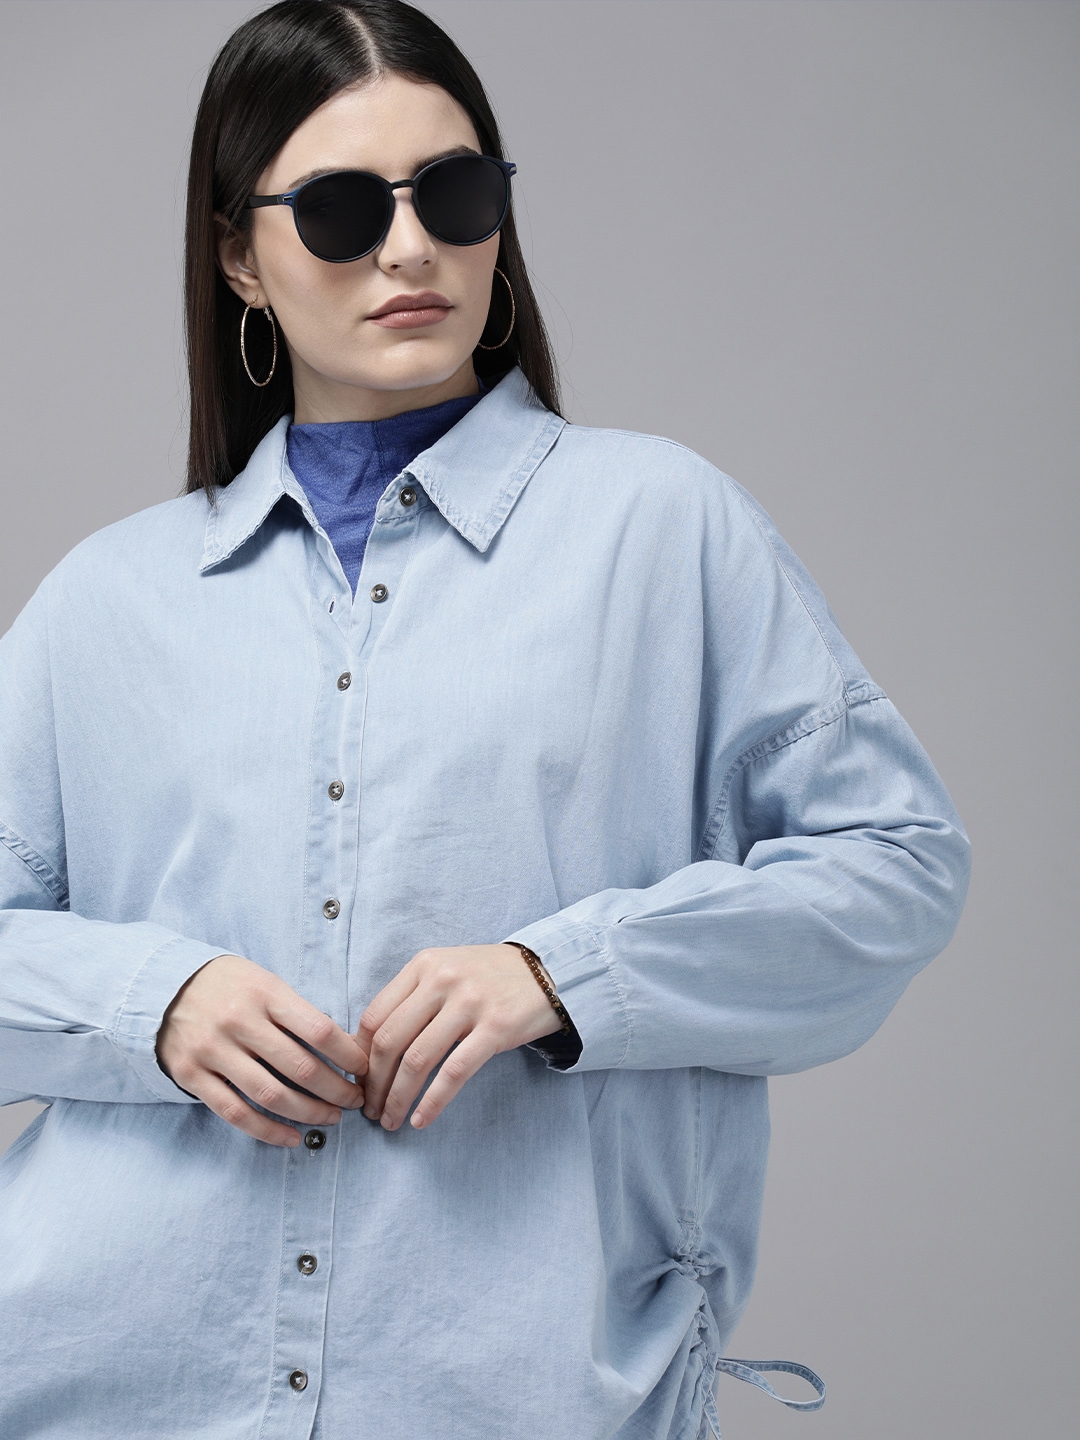 The Roadster Lifestyle Co Women Blue Solid Casual Denim Shirt